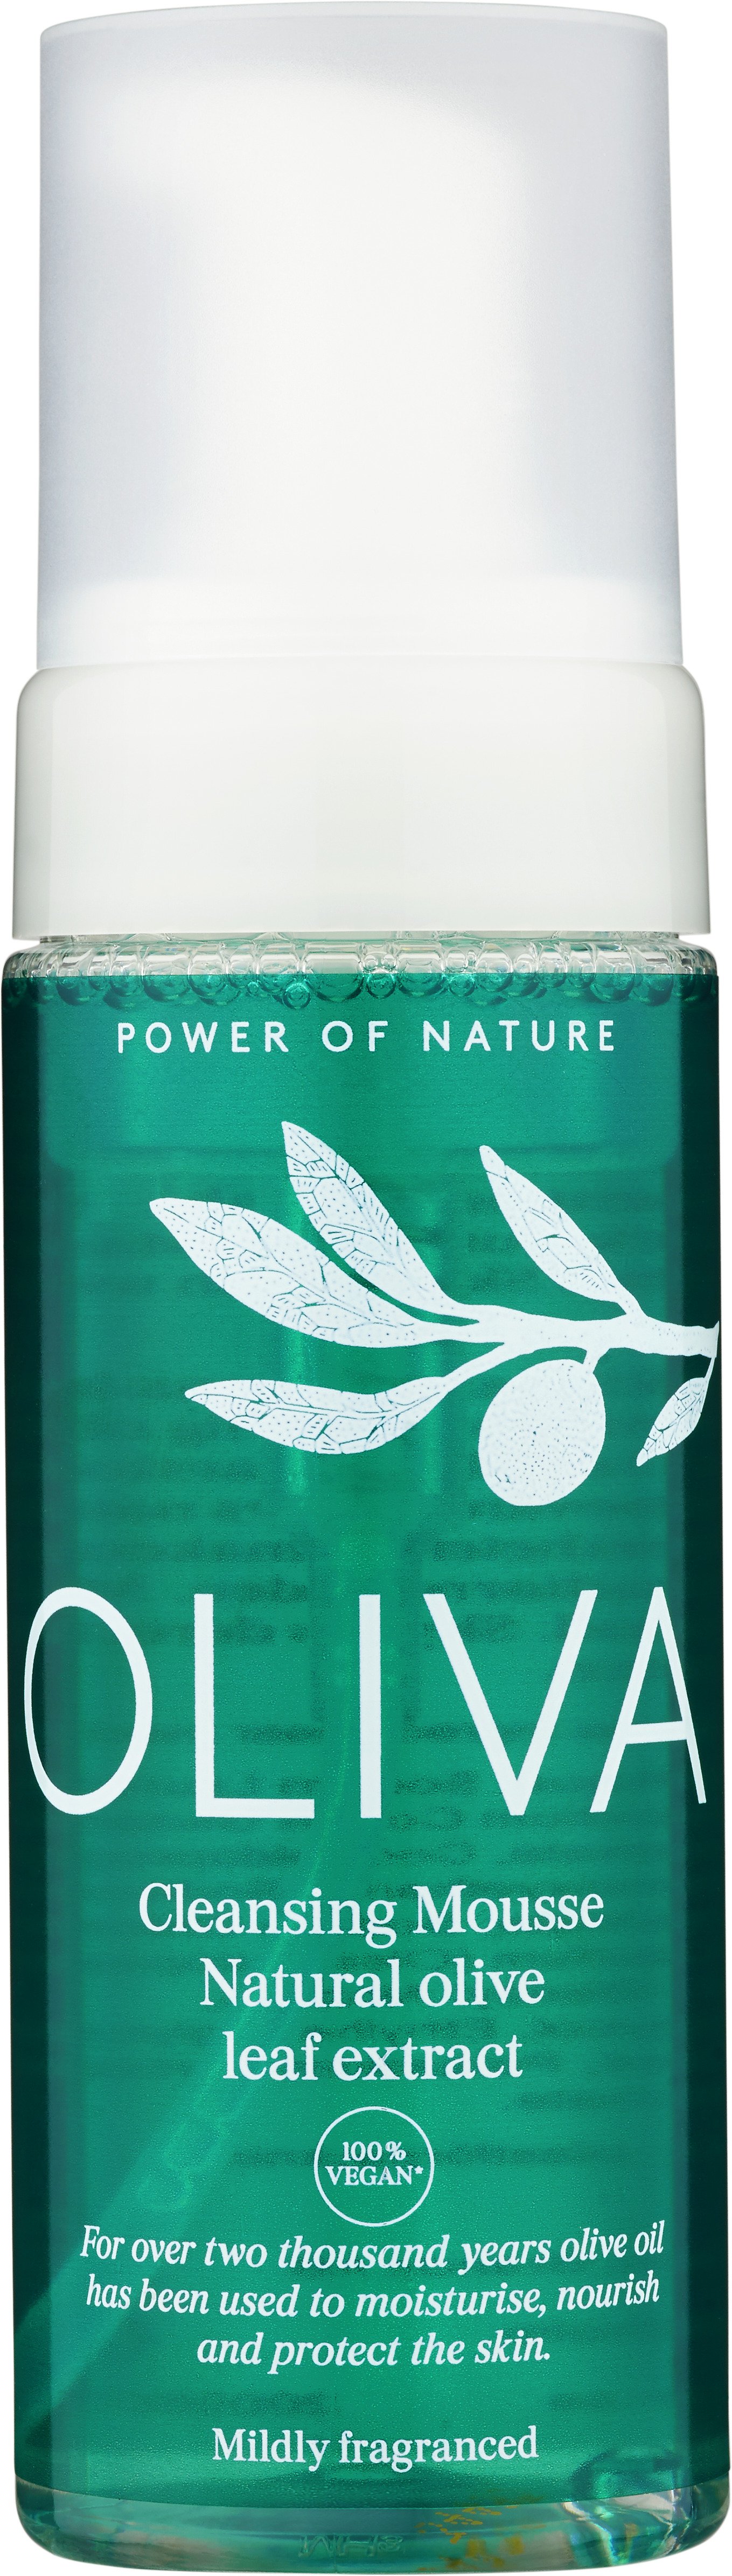 OLIVA Cleansing Mousse 150ml